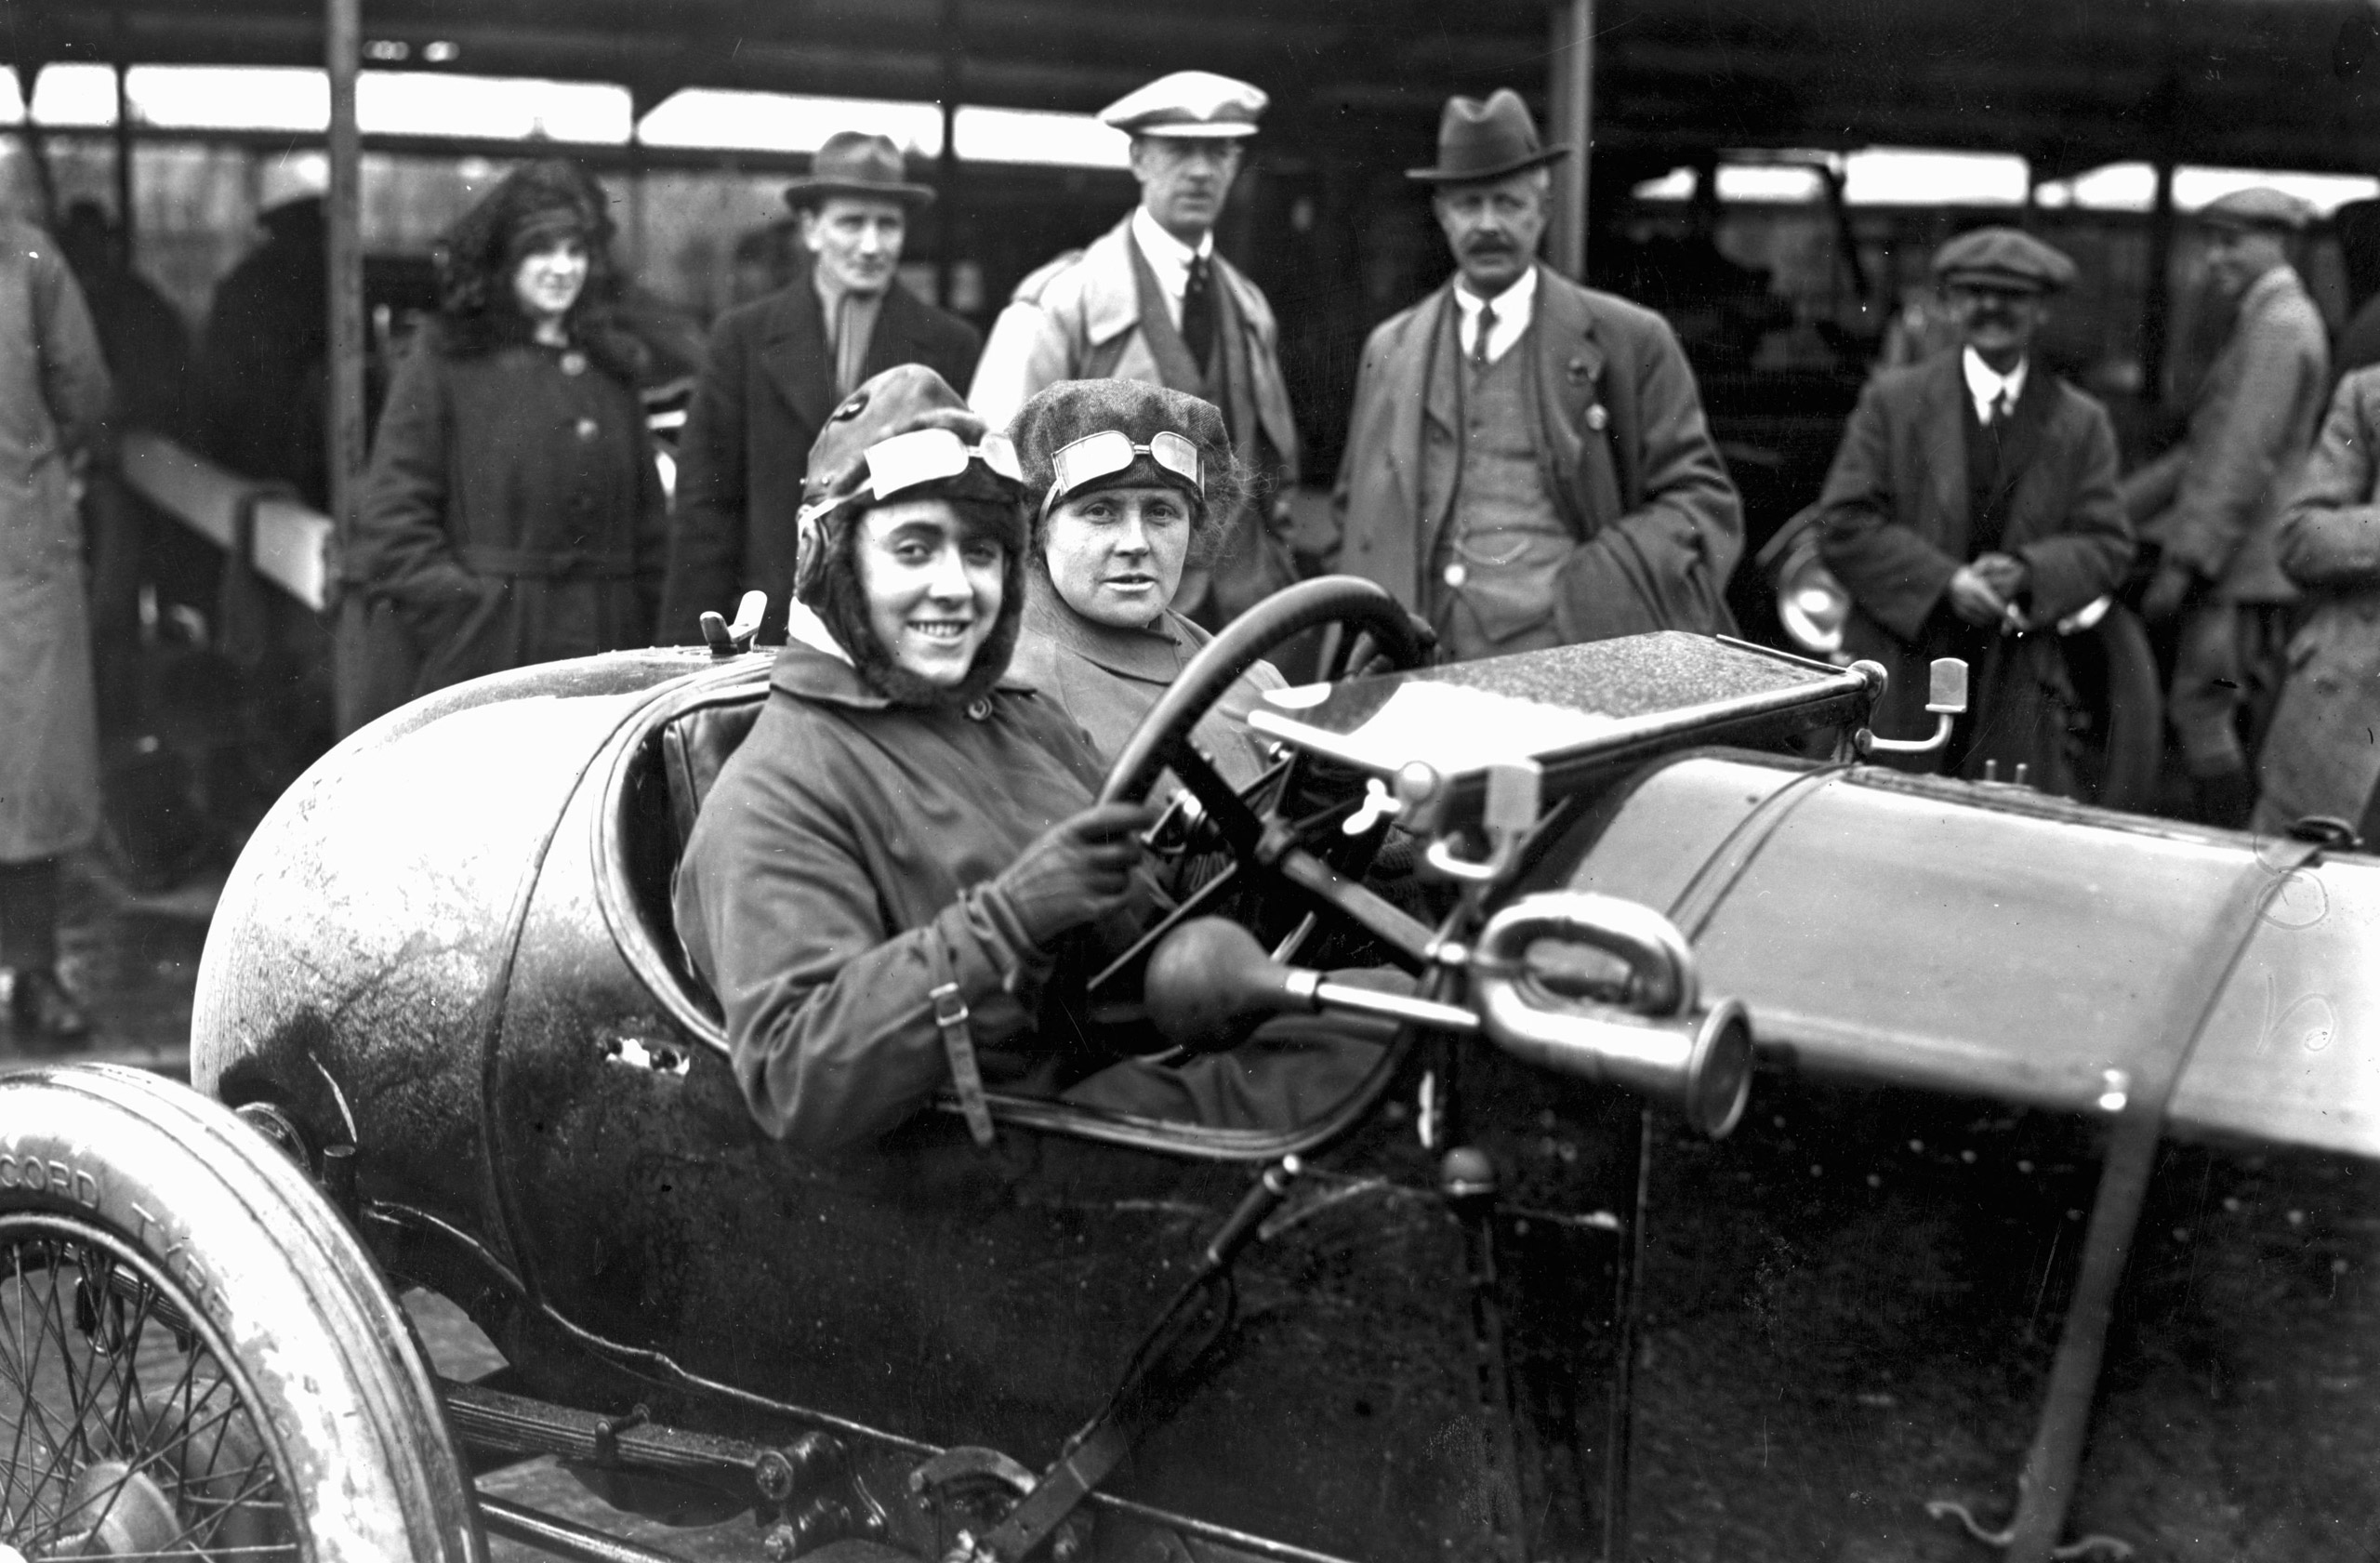 Motor meeting at Brooklands, Weybridge, Surrey. Competitor Ivy Cummings and her mother in their racing car. April 1920.